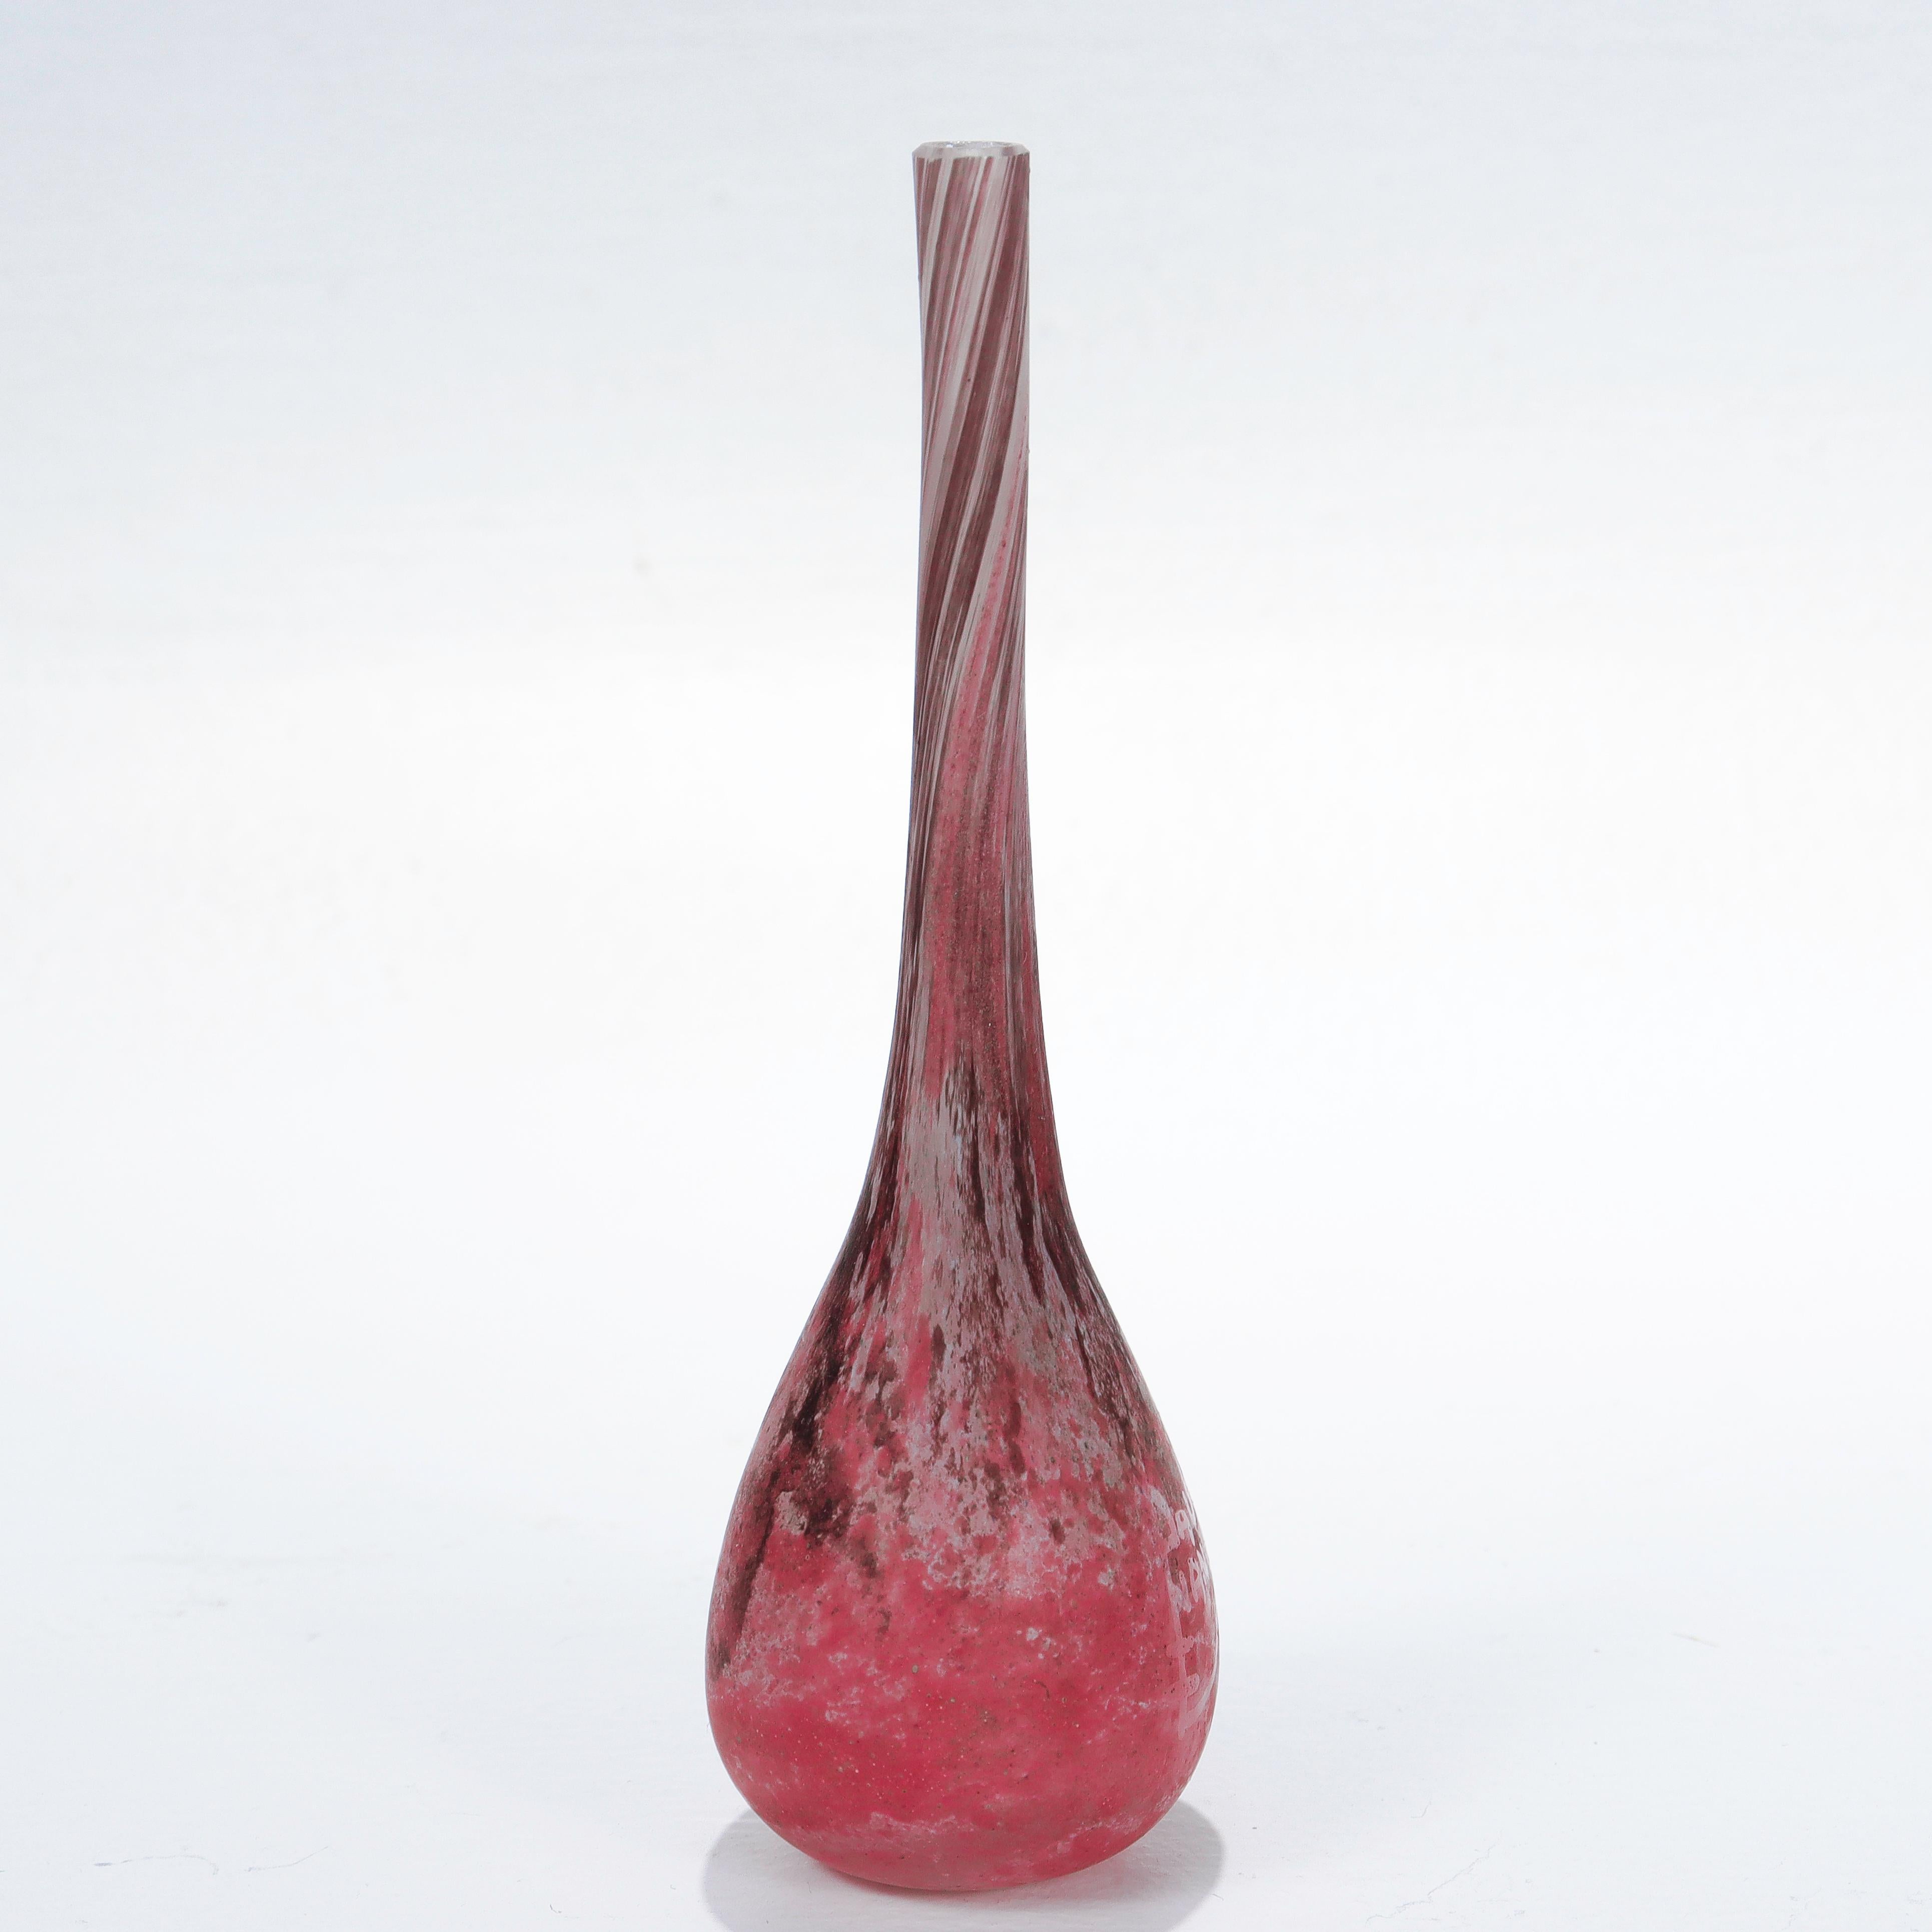 A very fine miniature French art glass vase.

By Daum.

In a pink, purple, and grey mottled color palette.

With an elongated slender neck and acid-etched 